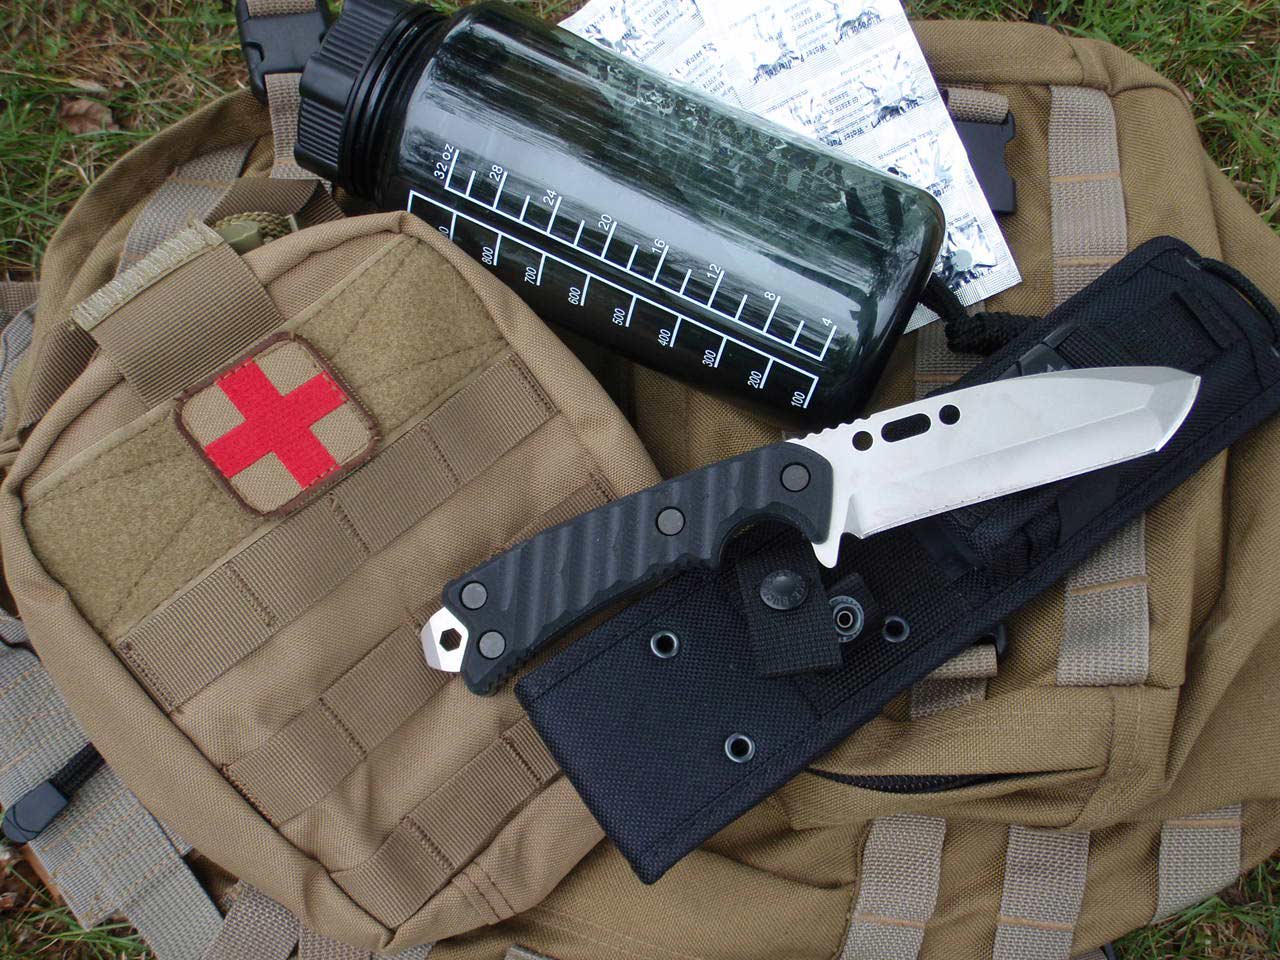 11 essential items for four specialized survival kits